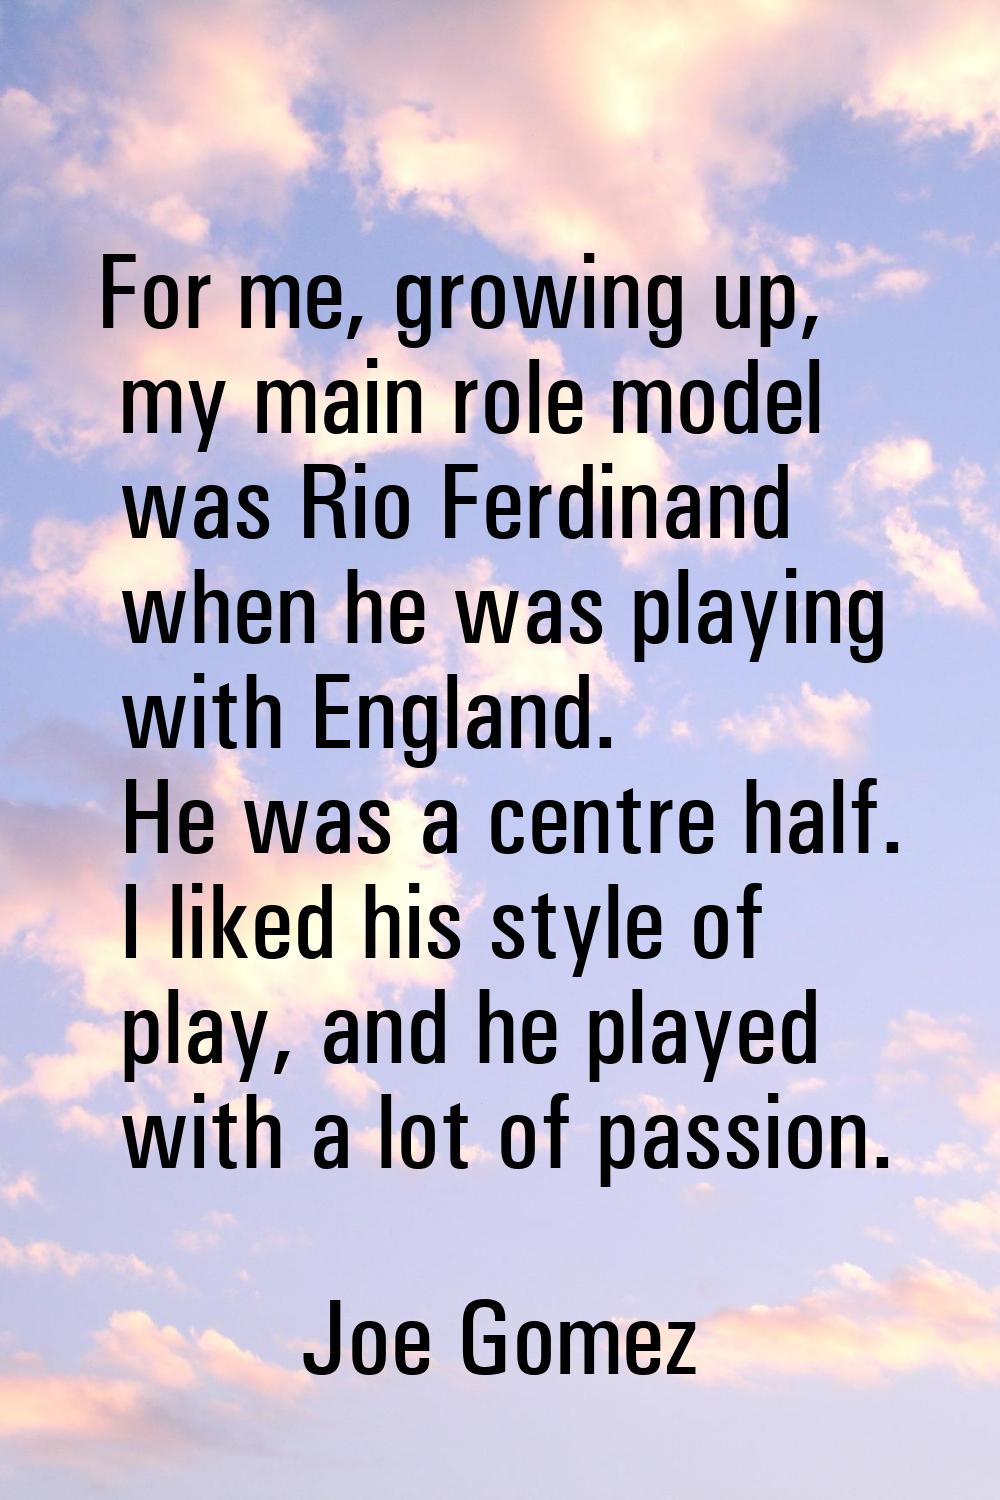 For me, growing up, my main role model was Rio Ferdinand when he was playing with England. He was a